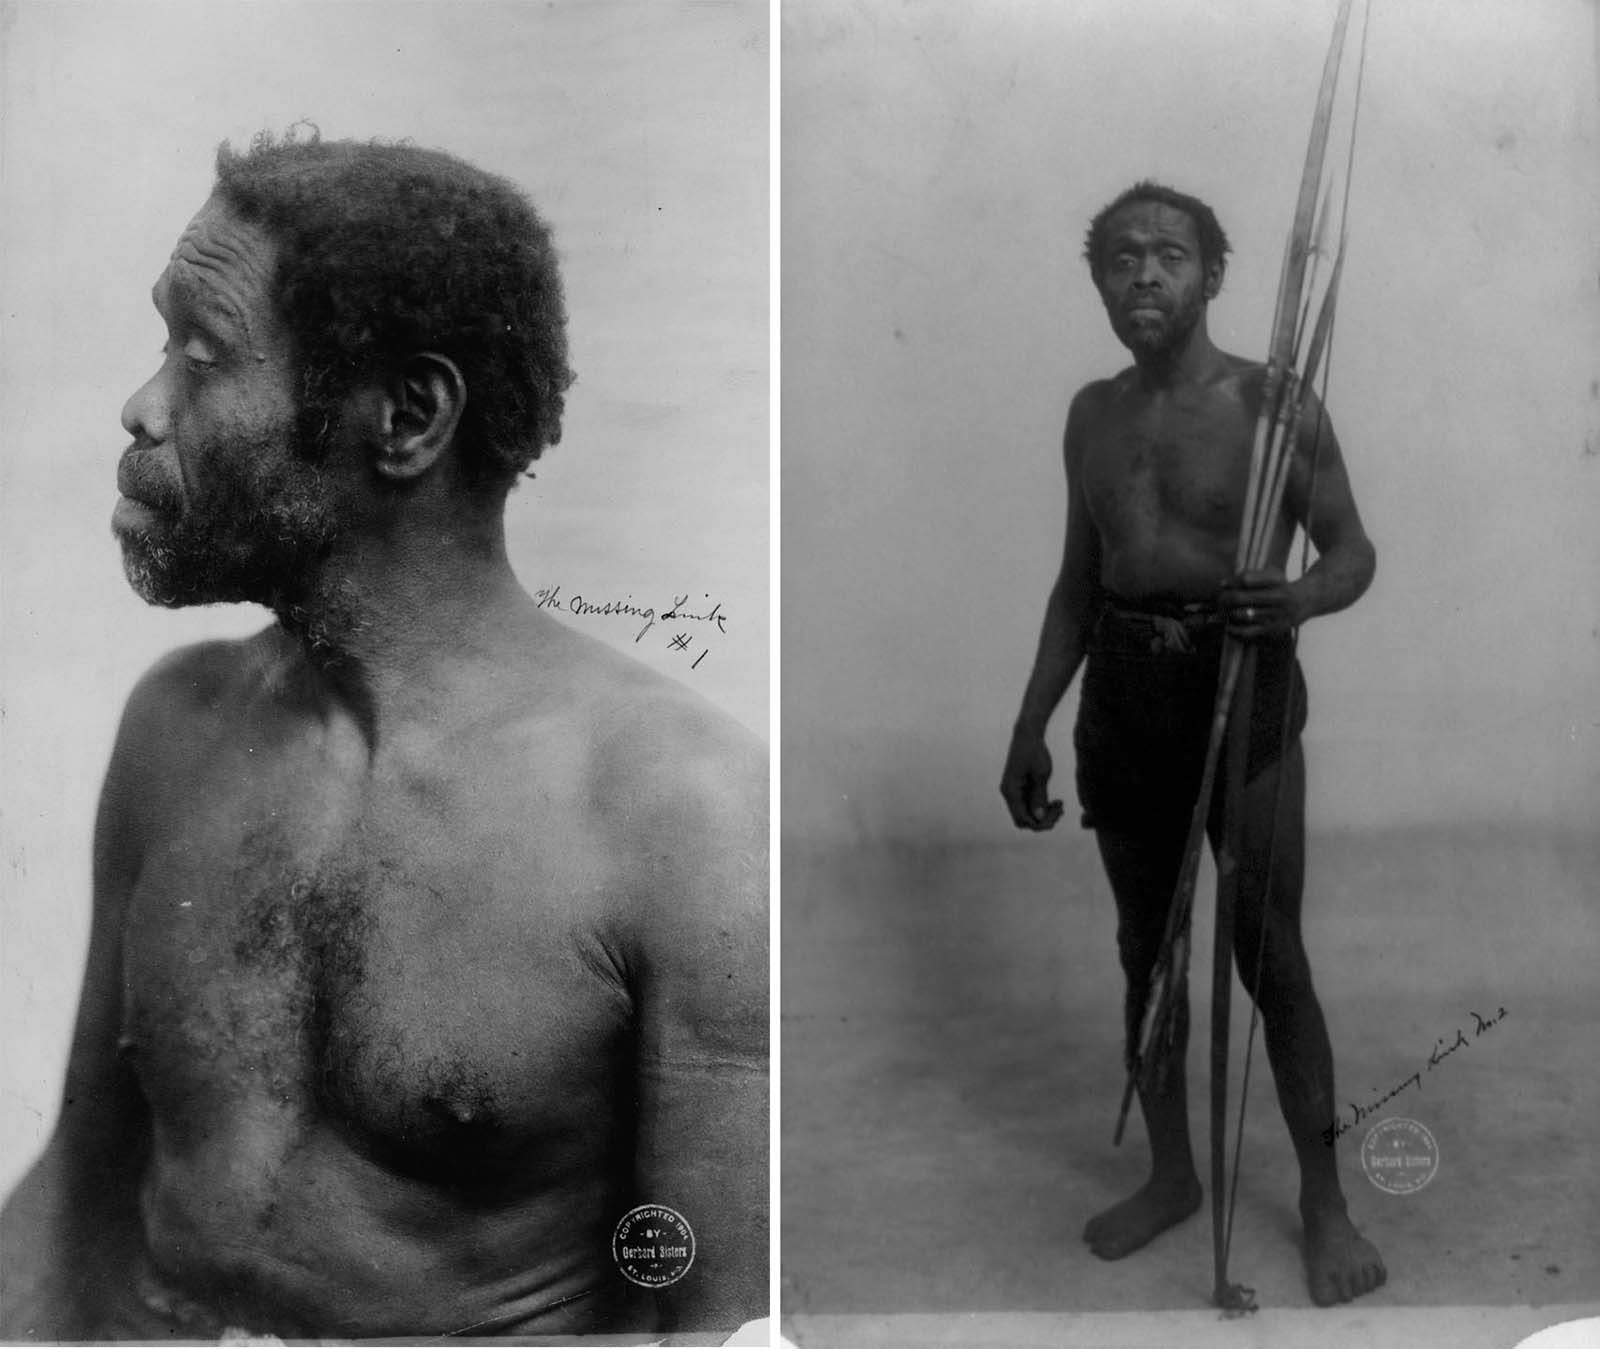 This unidentified African man was cruelly displayed as an exhibit at the 1904 St. Louis World’s Fair in Missouri. The words ‘the missing link’ were scrawled on both of the photos.